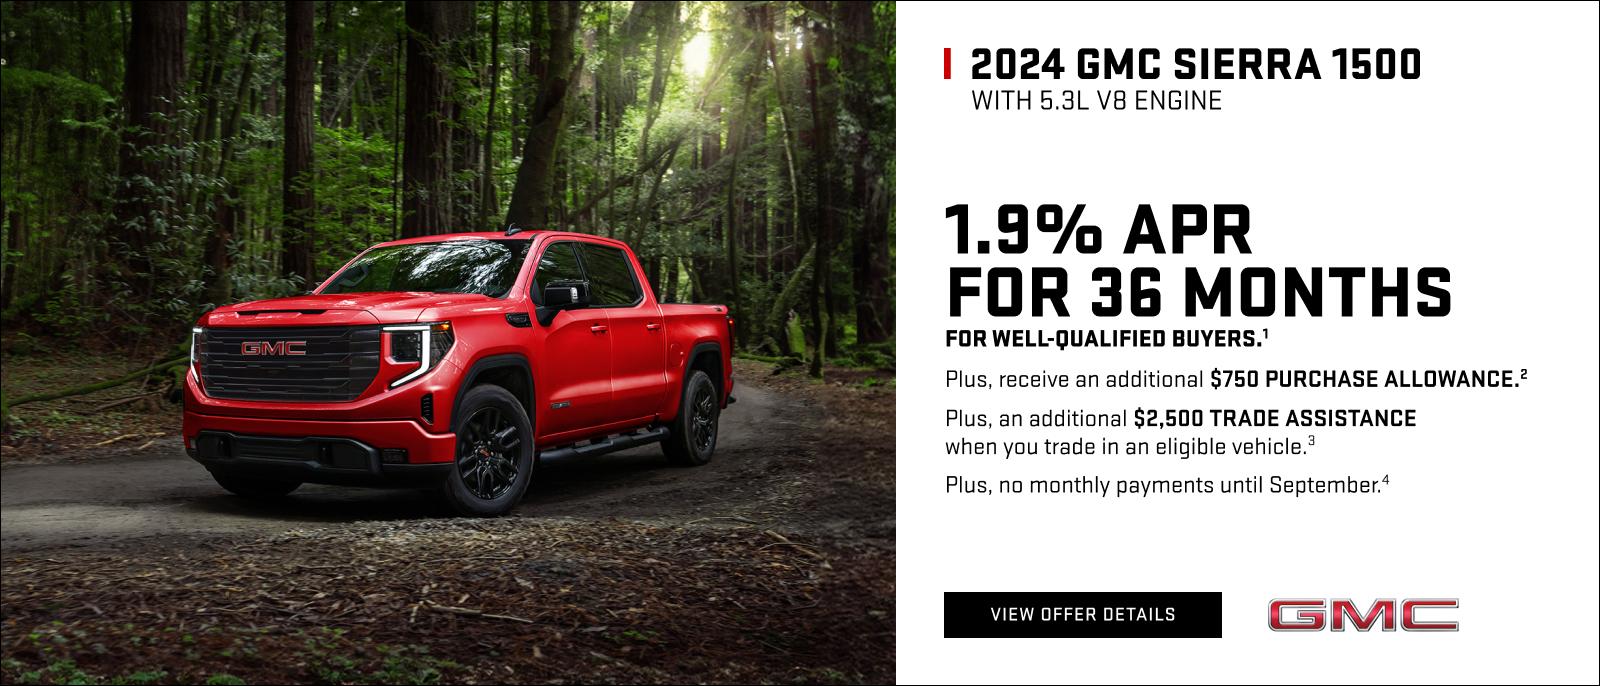 1.9% APR FOR 36 MONTHS for well-qualified buyers.1

Plus, receive an additional $750 PURCHASE ALLOWANCE.2

Plus, an additional $2,500 TRADE ASSISTANCE when you trade in an eligible vehicle.3

Plus, no monthly payments until September.4